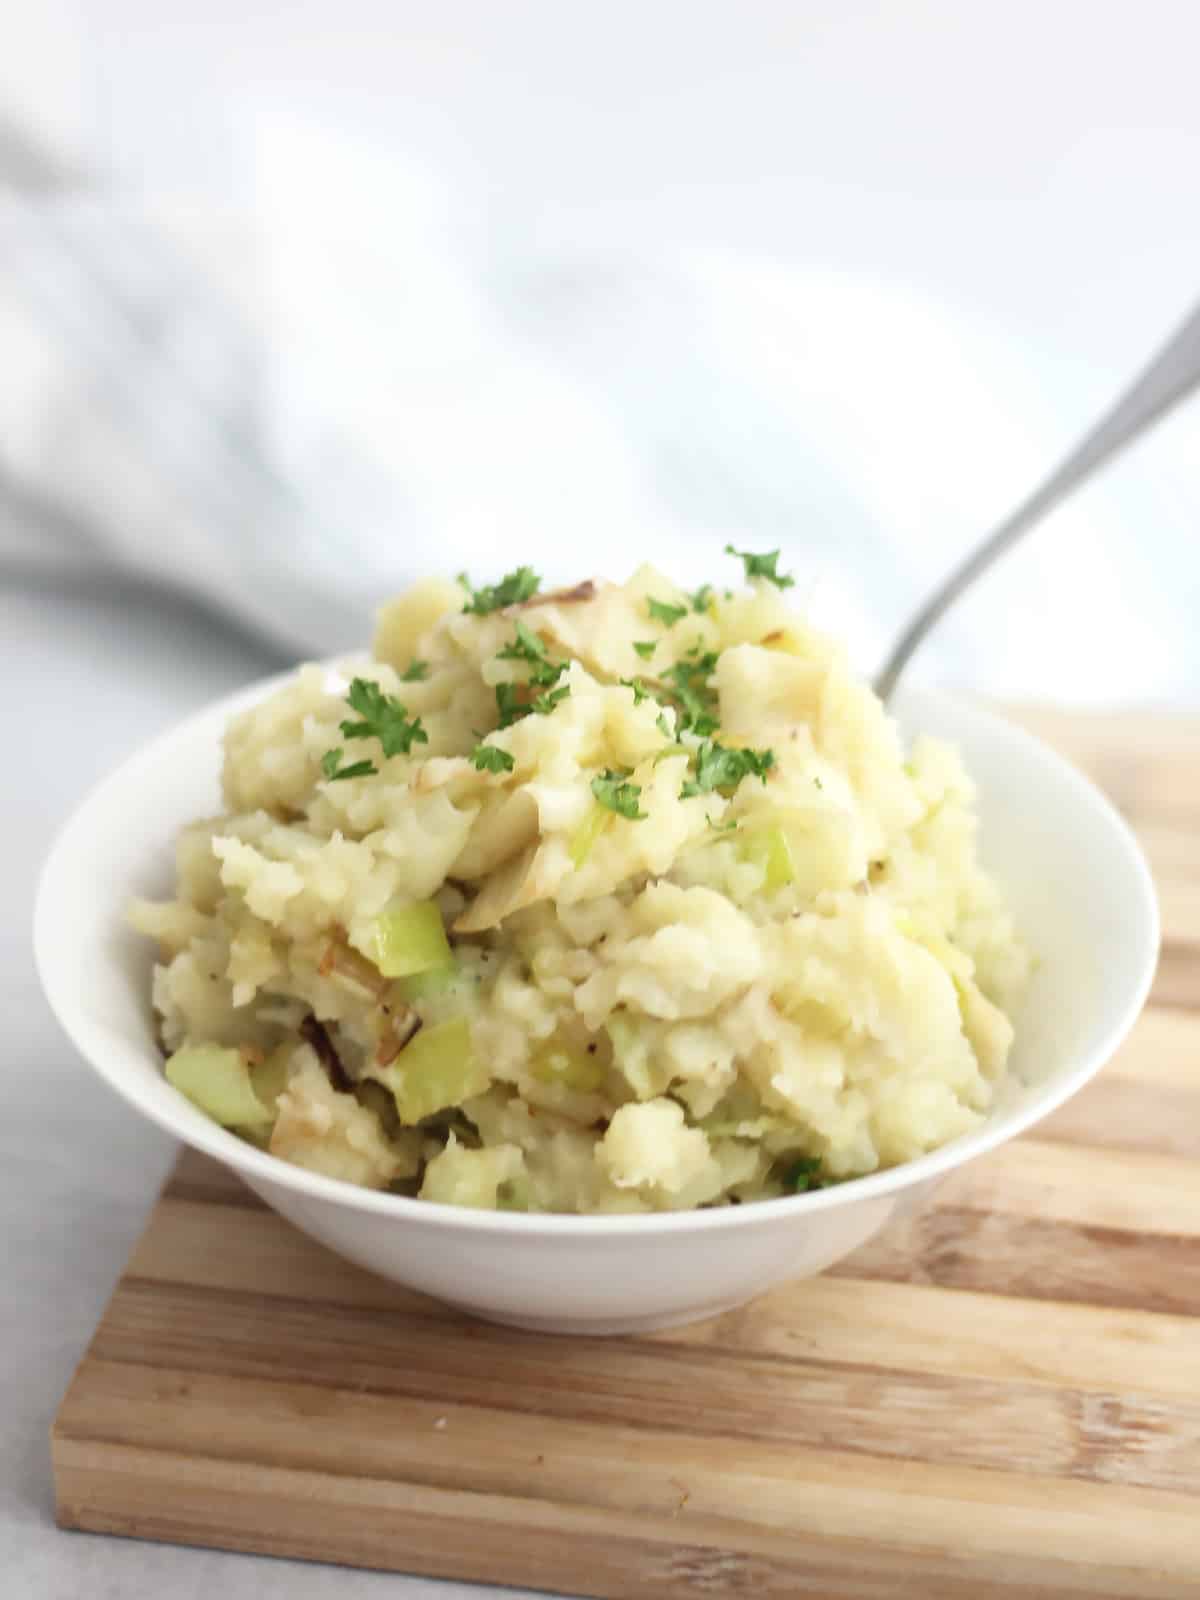 A spoon in a bowl of mashed potatoes with sautéed leeks.